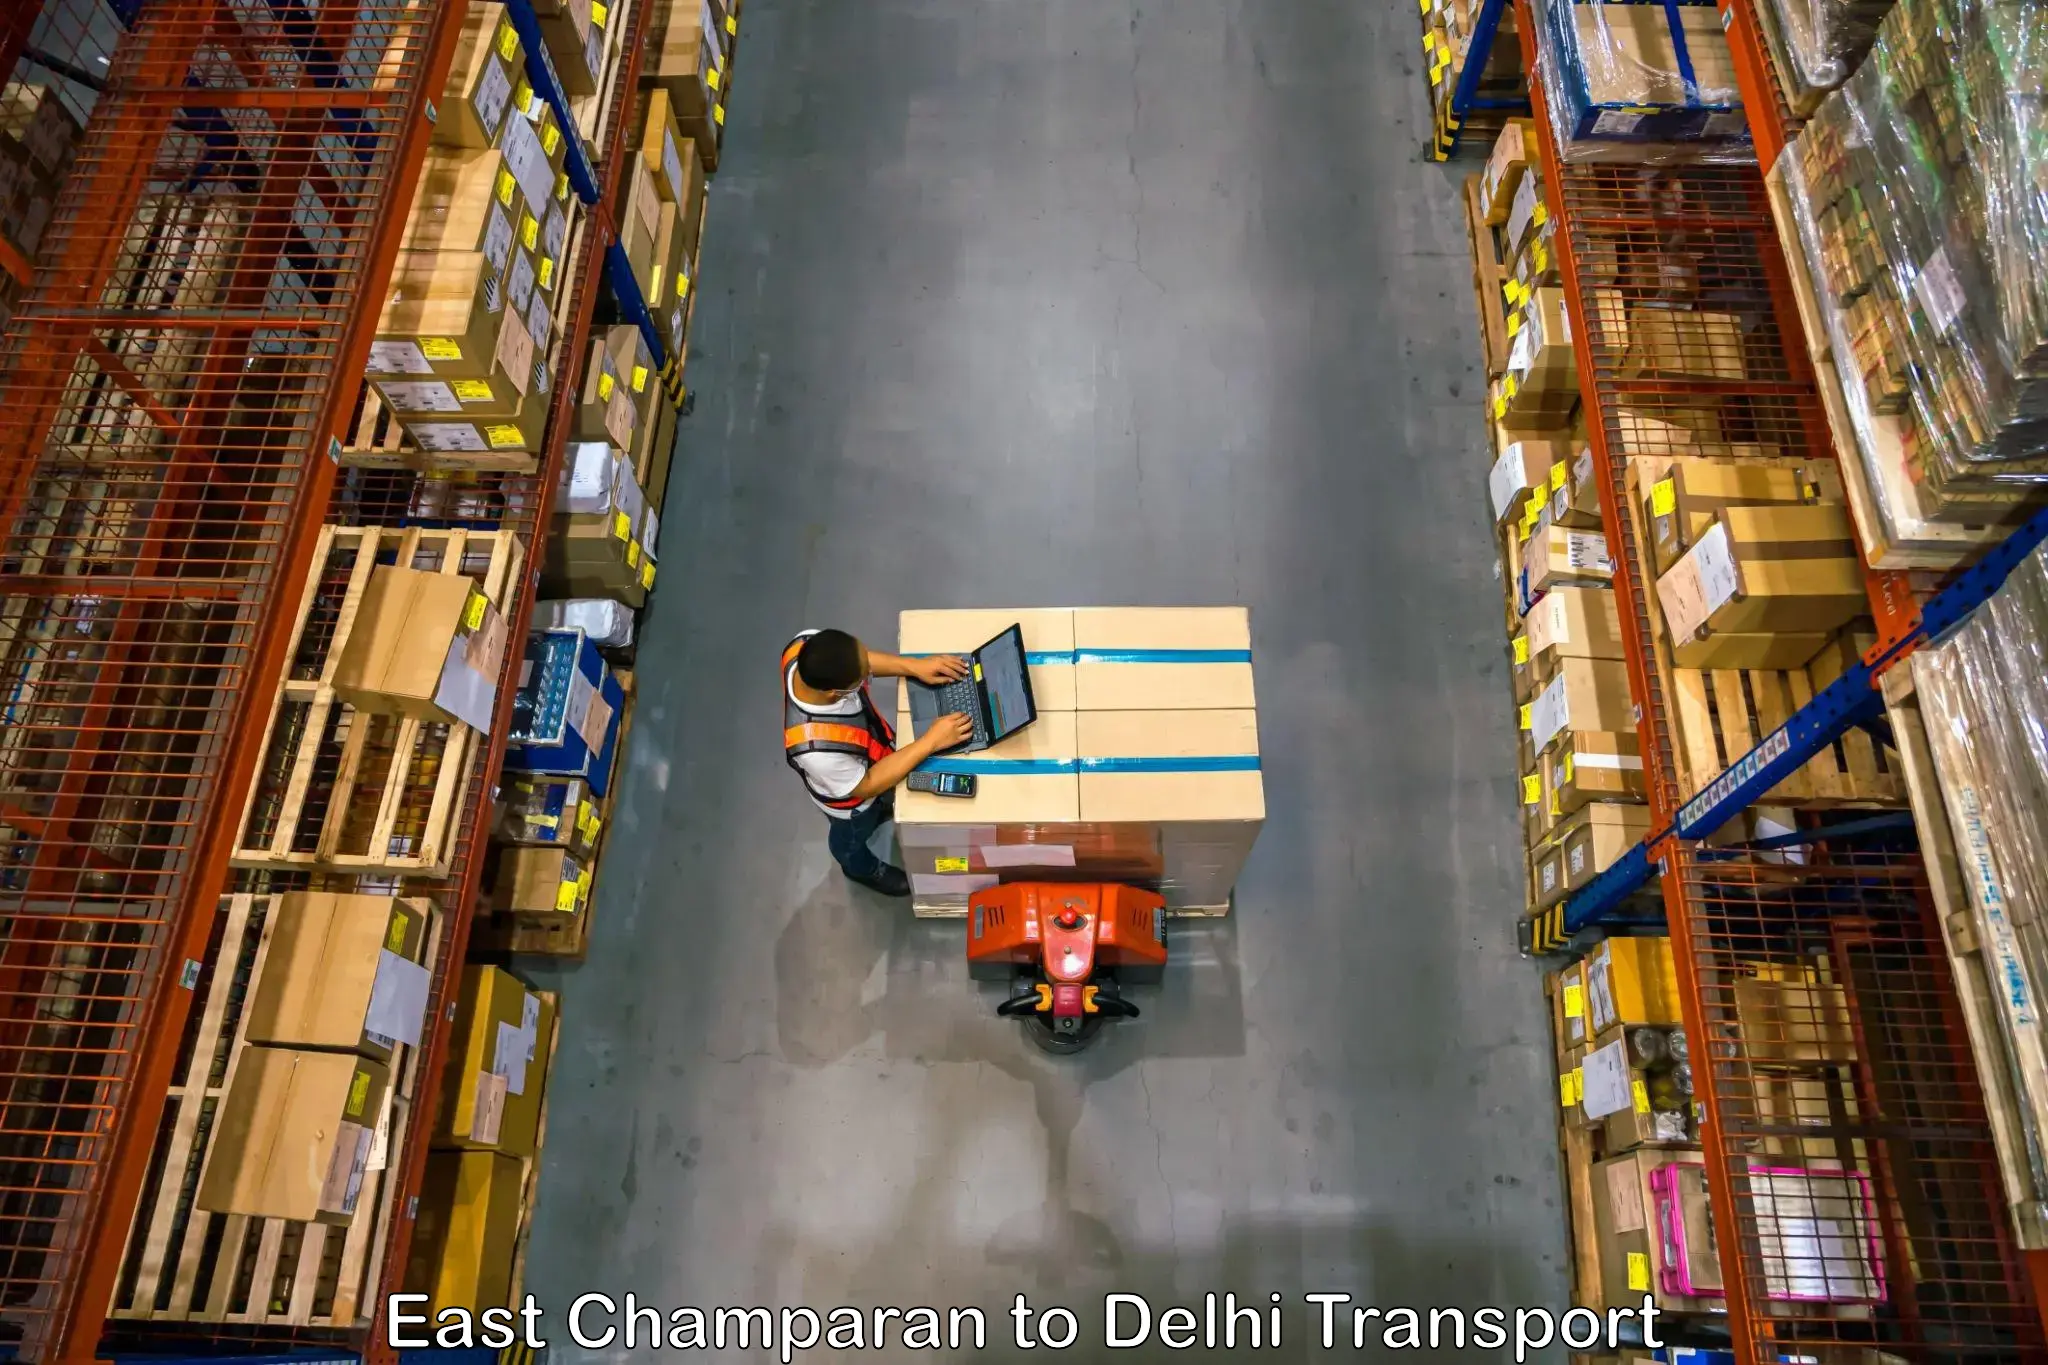 Bike shipping service East Champaran to NCR